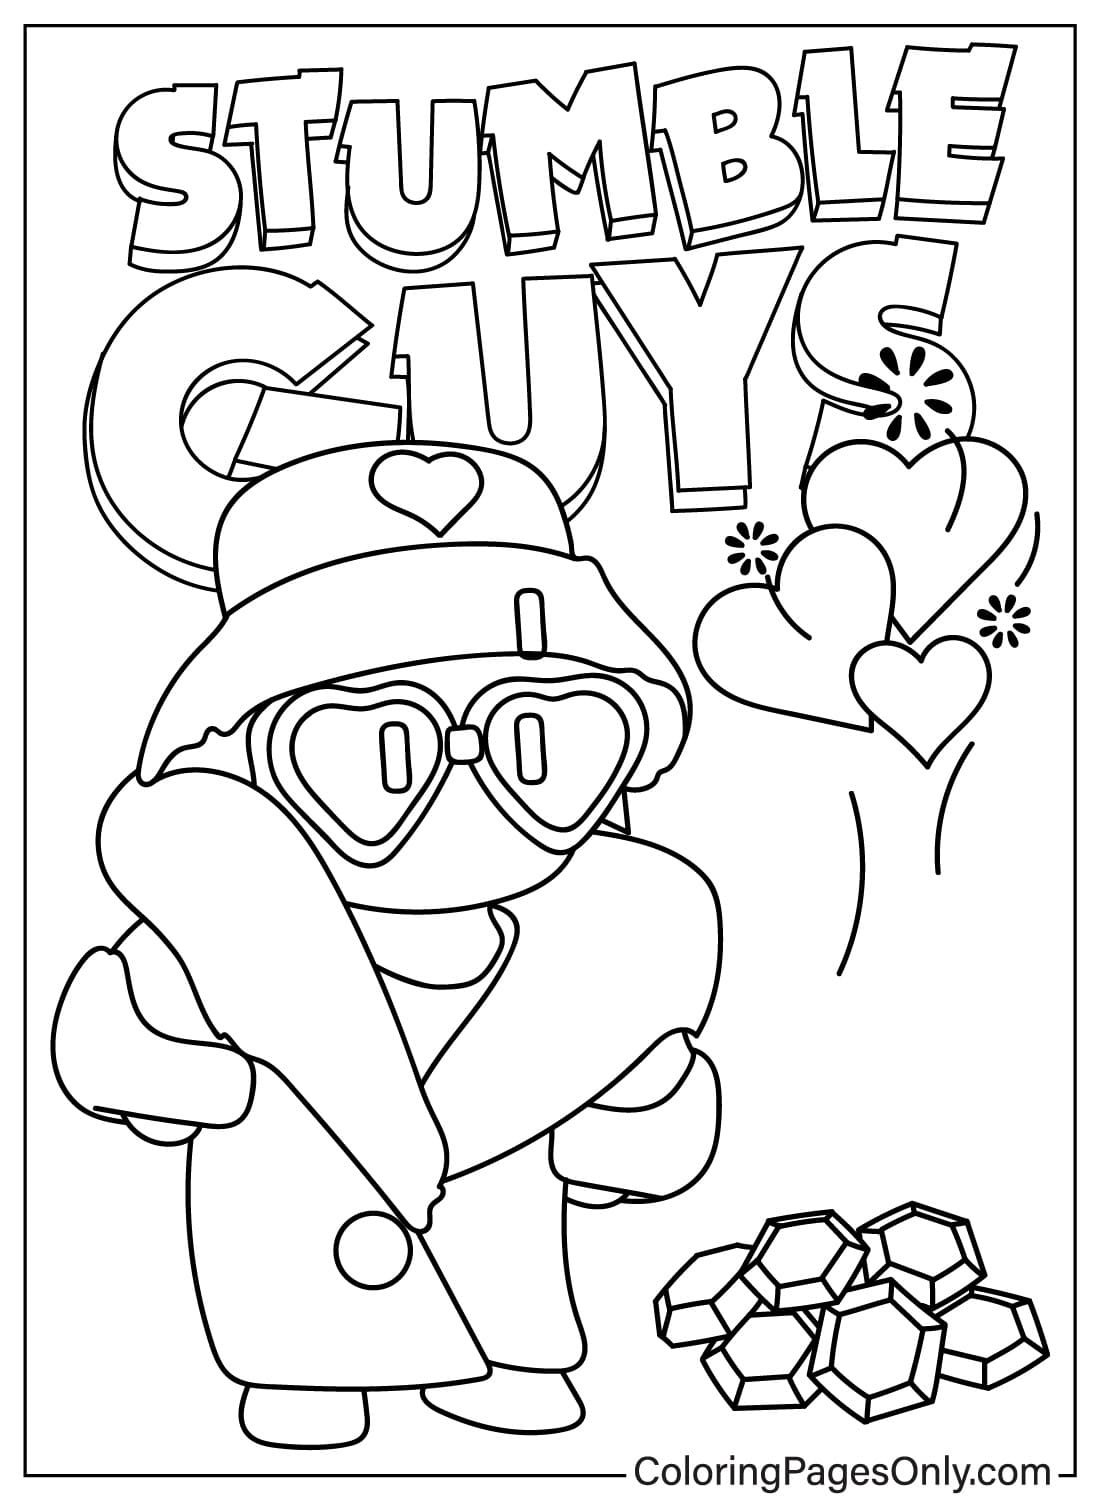 Drawing Stumble Guys Coloring Page from Stumble Guys